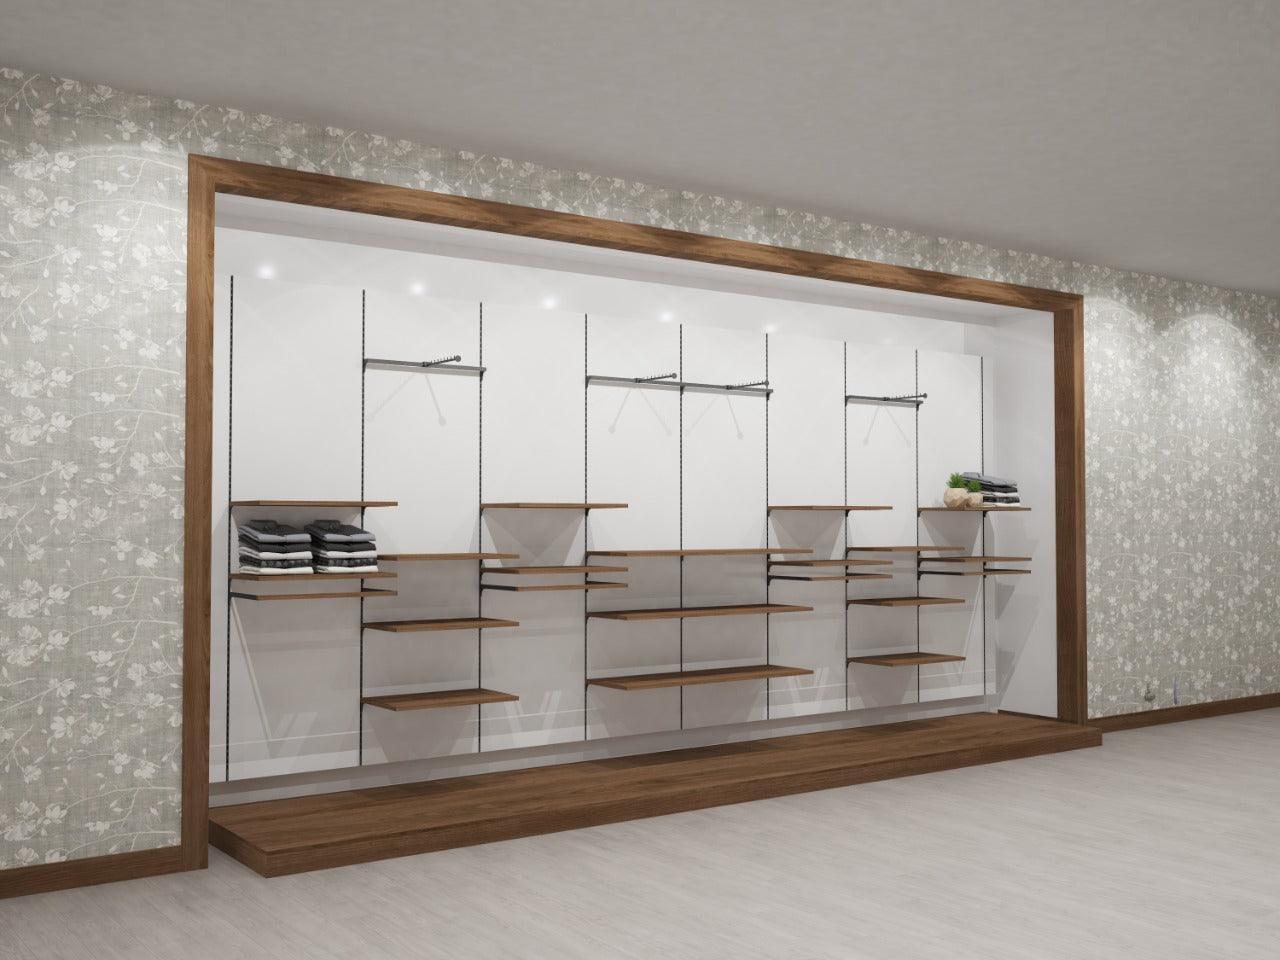 Channel Panel Shelving System - Fixturic